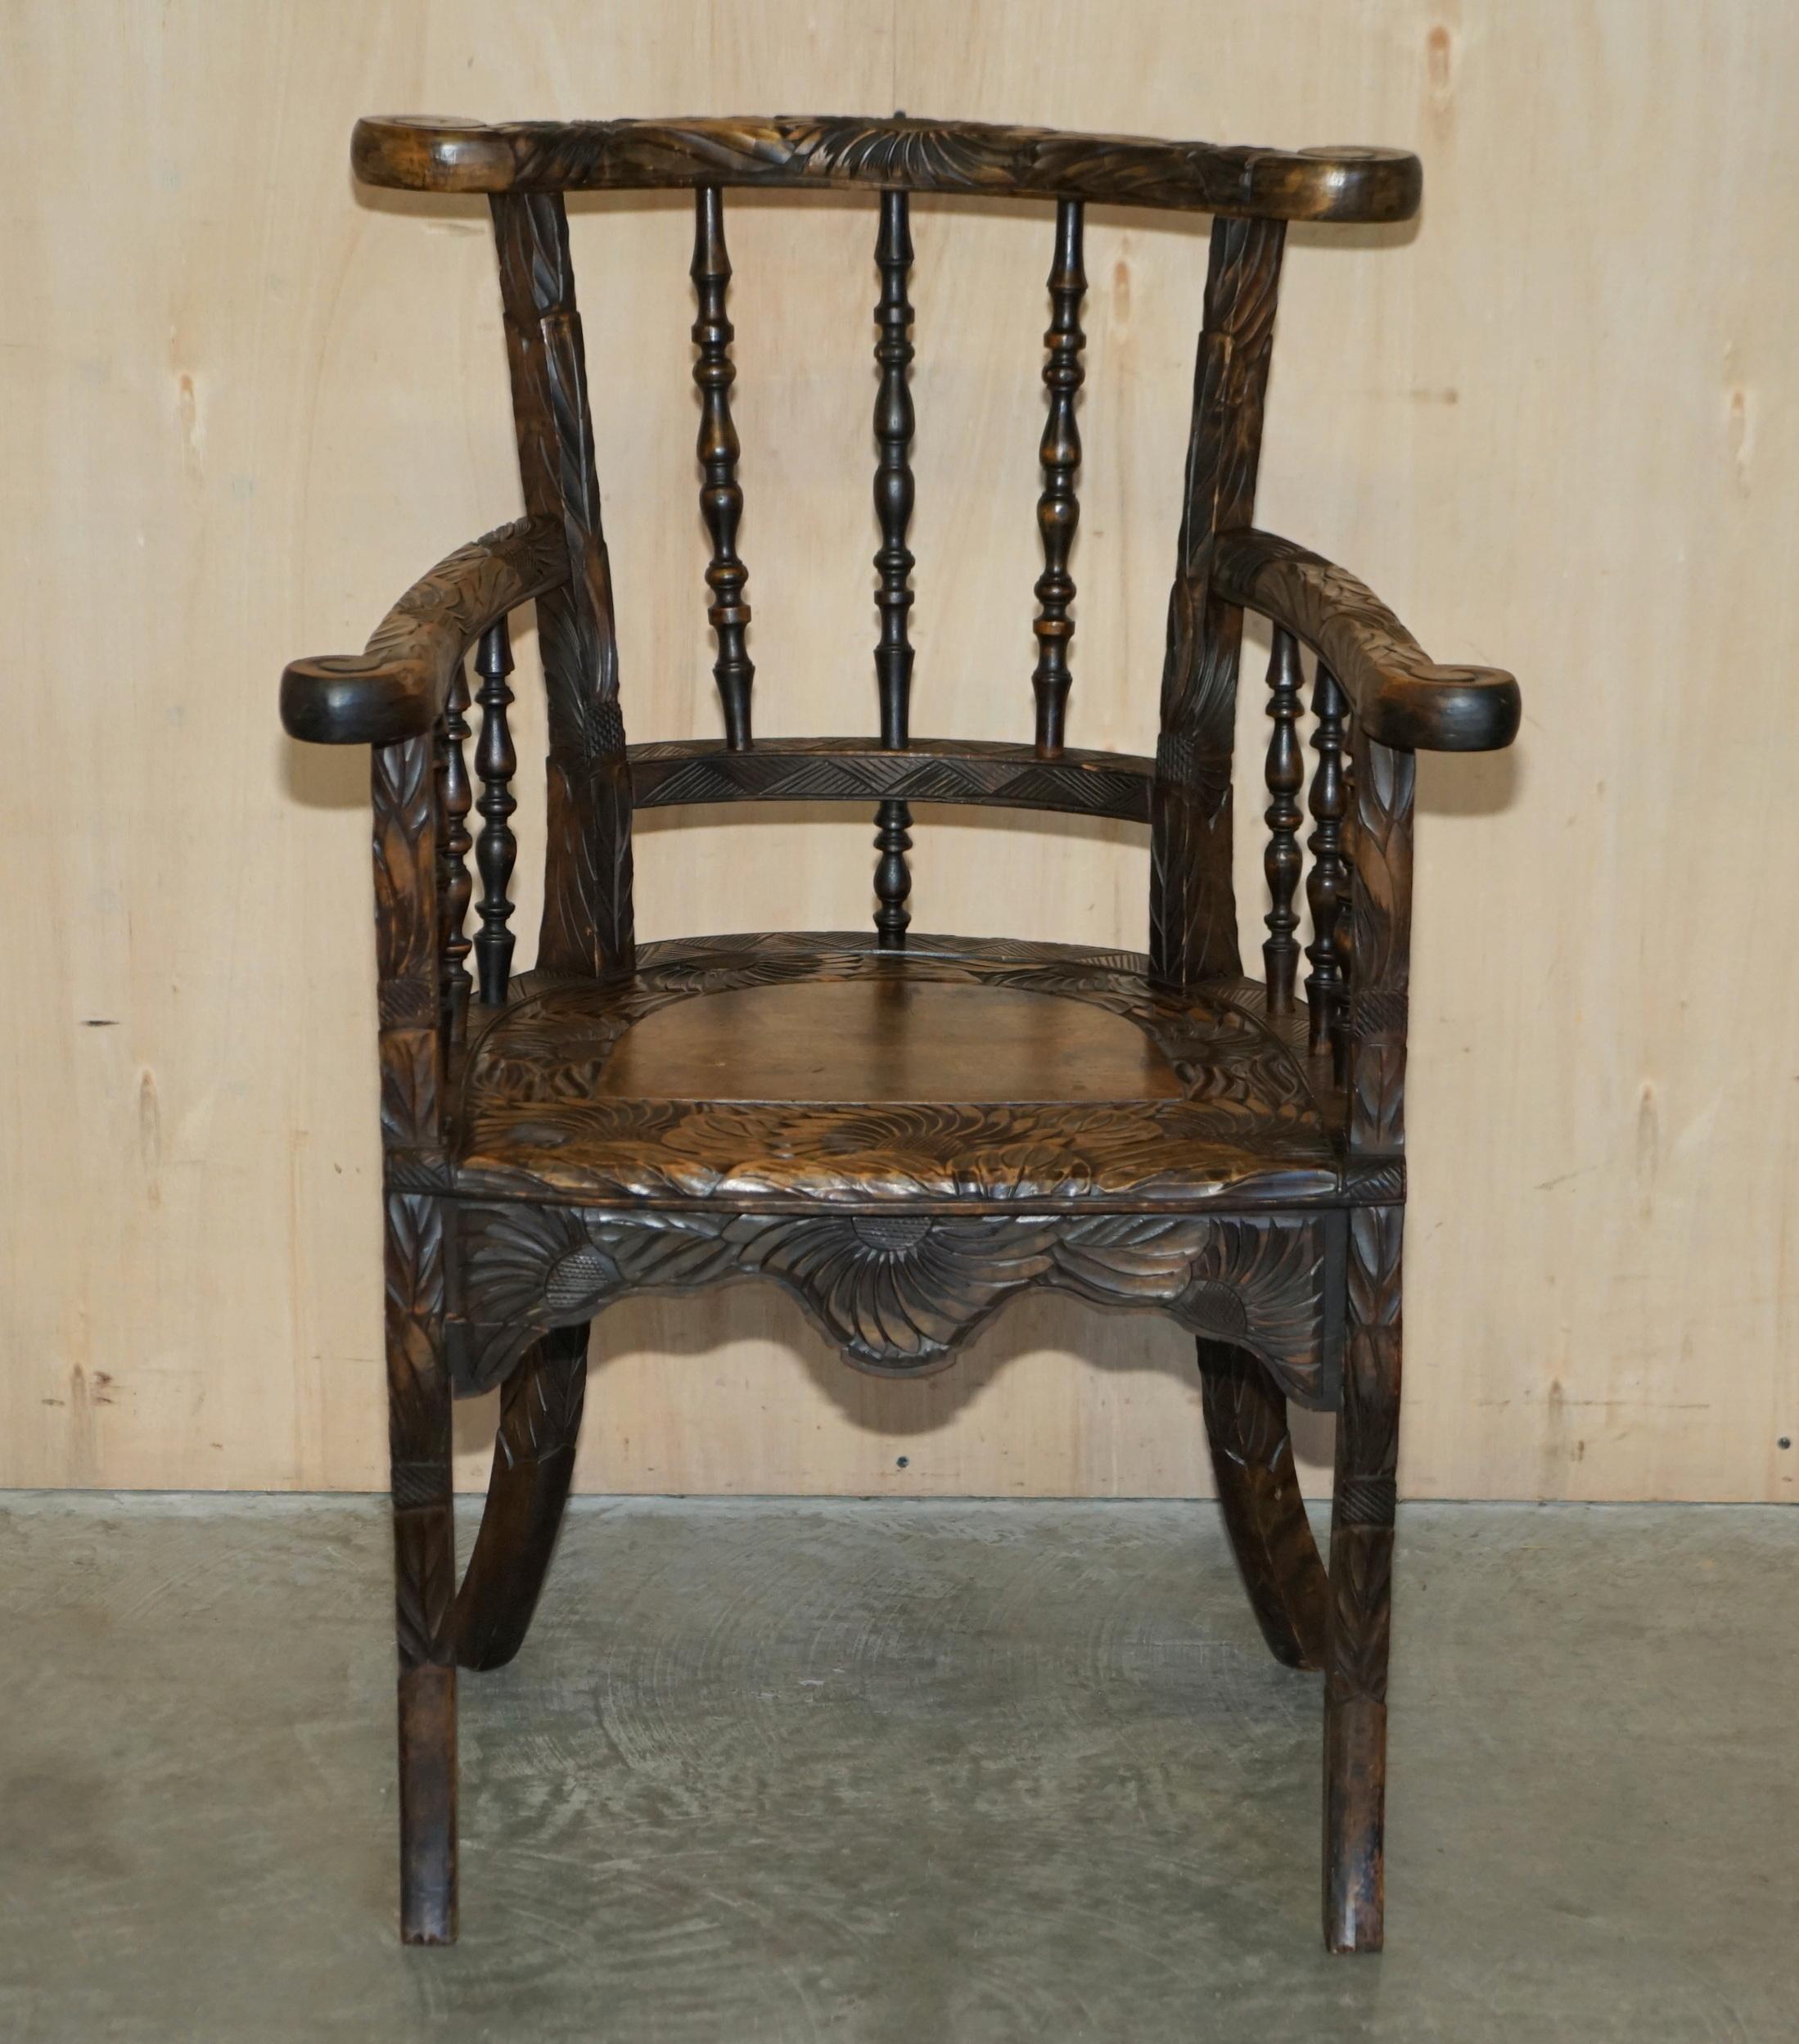 Royal House Antiques

Royal House Antiques is delighted to offer for sale this stunning and exceptionally rare original Liberty’s London Japanese 1905 Qing Dynasty armchair.

Please note the delivery fee listed is just a guide, it covers within the